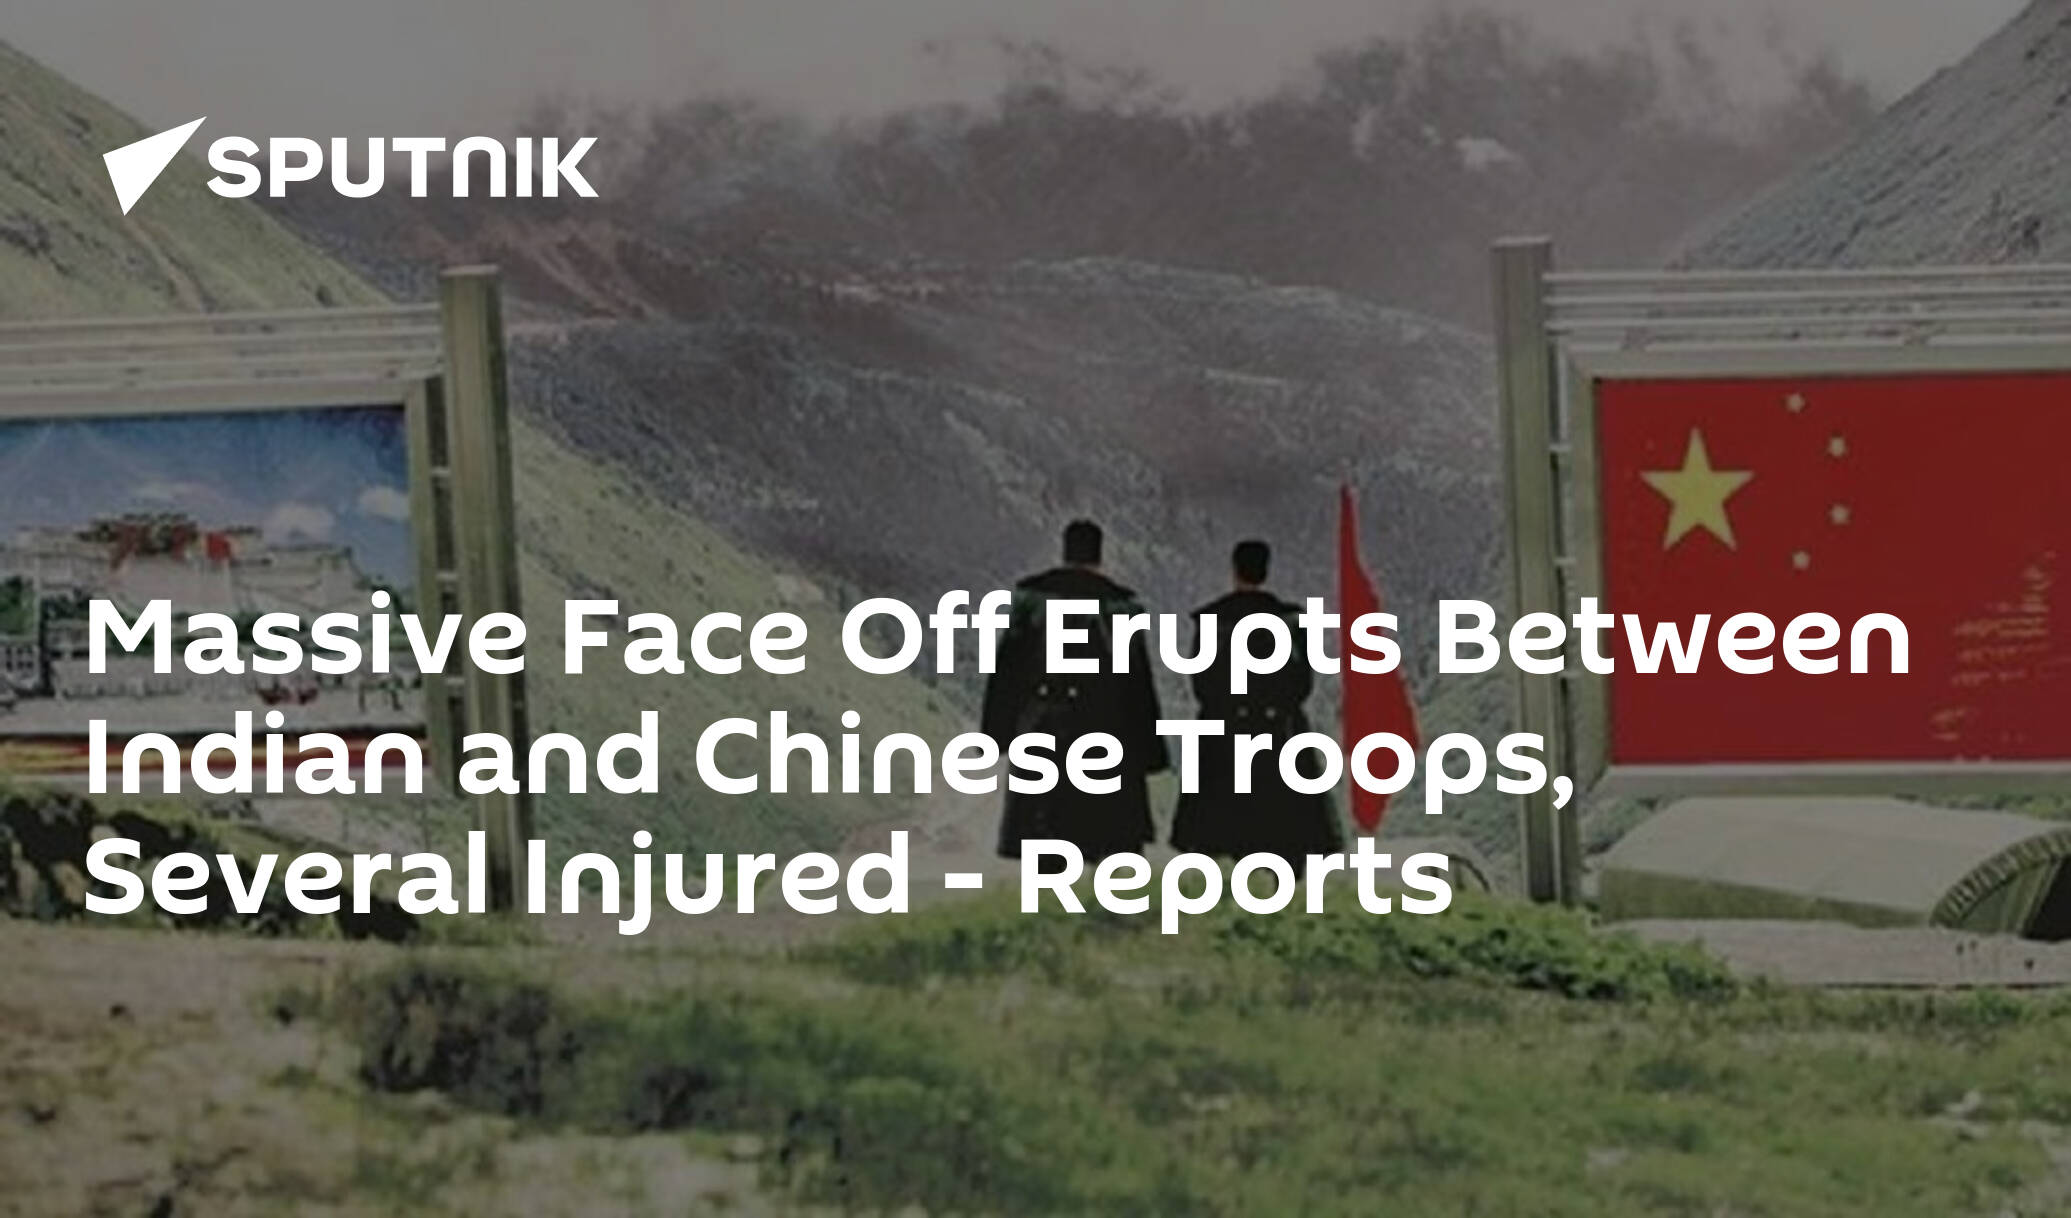 Massive Face Off Erupts Between Indian and Chinese Troops, Several Injured - Reports